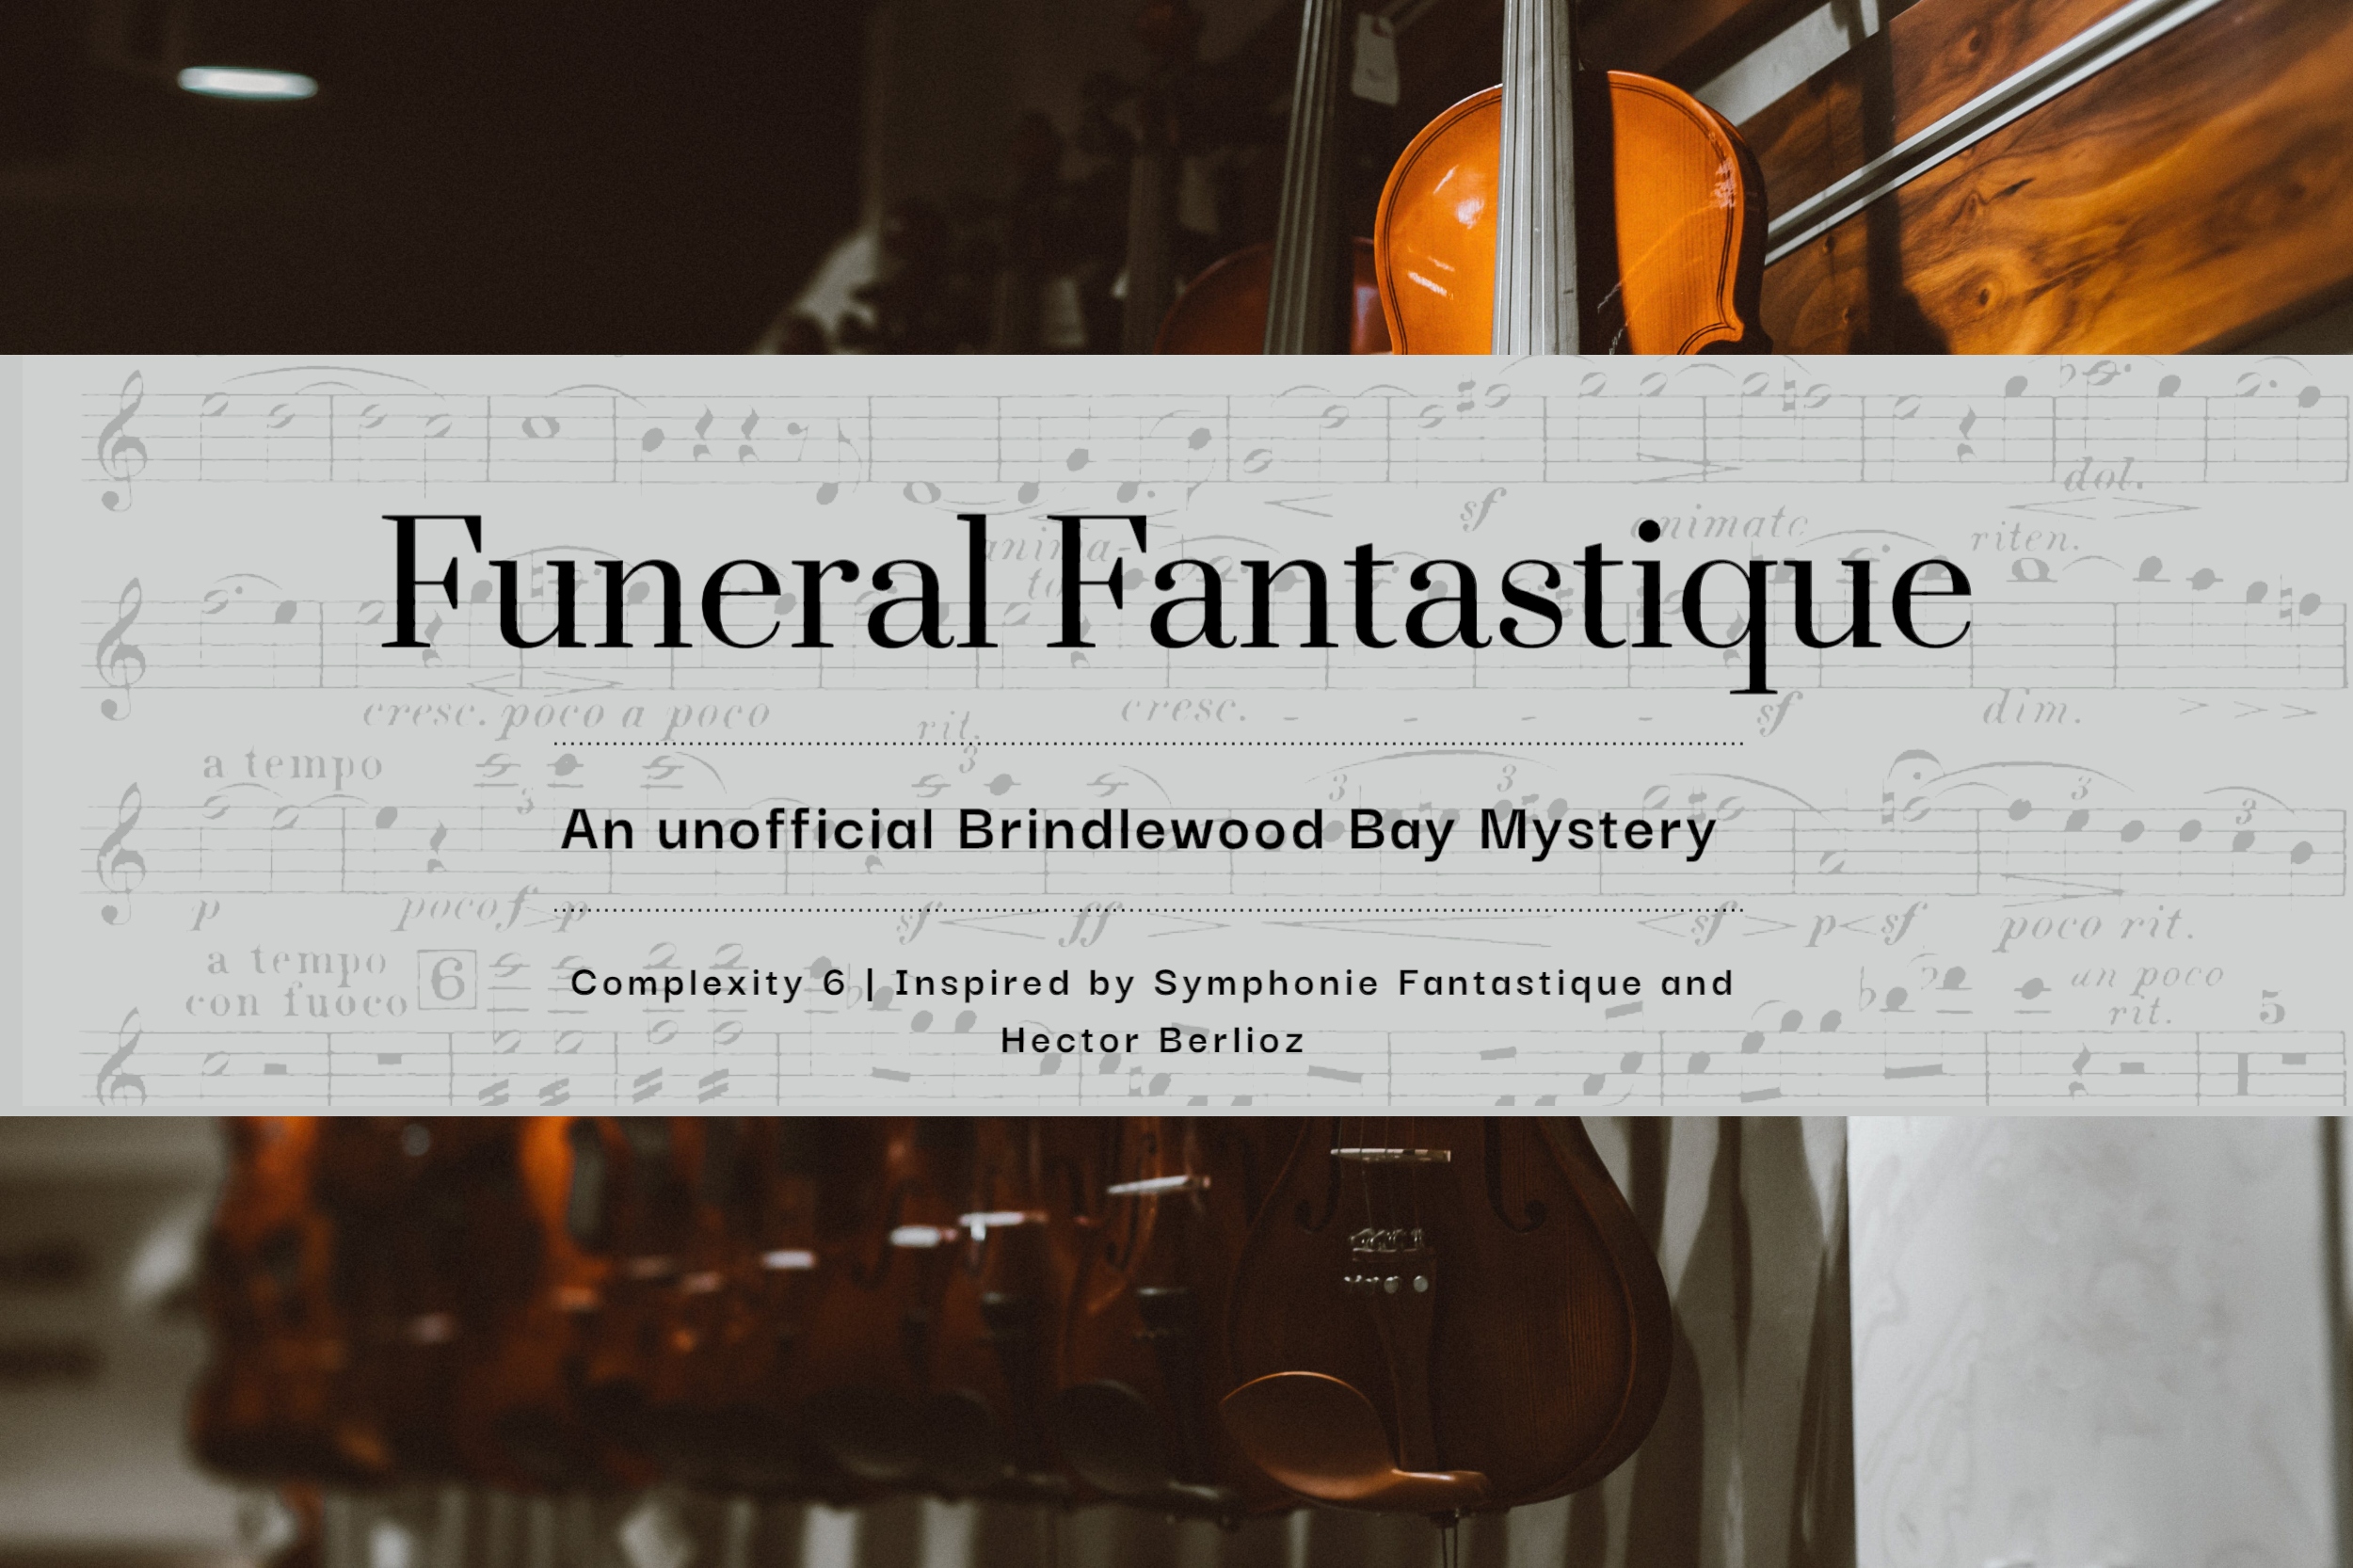 Funeral Fantastique: An unofficial Brindlewood Bay Mystery